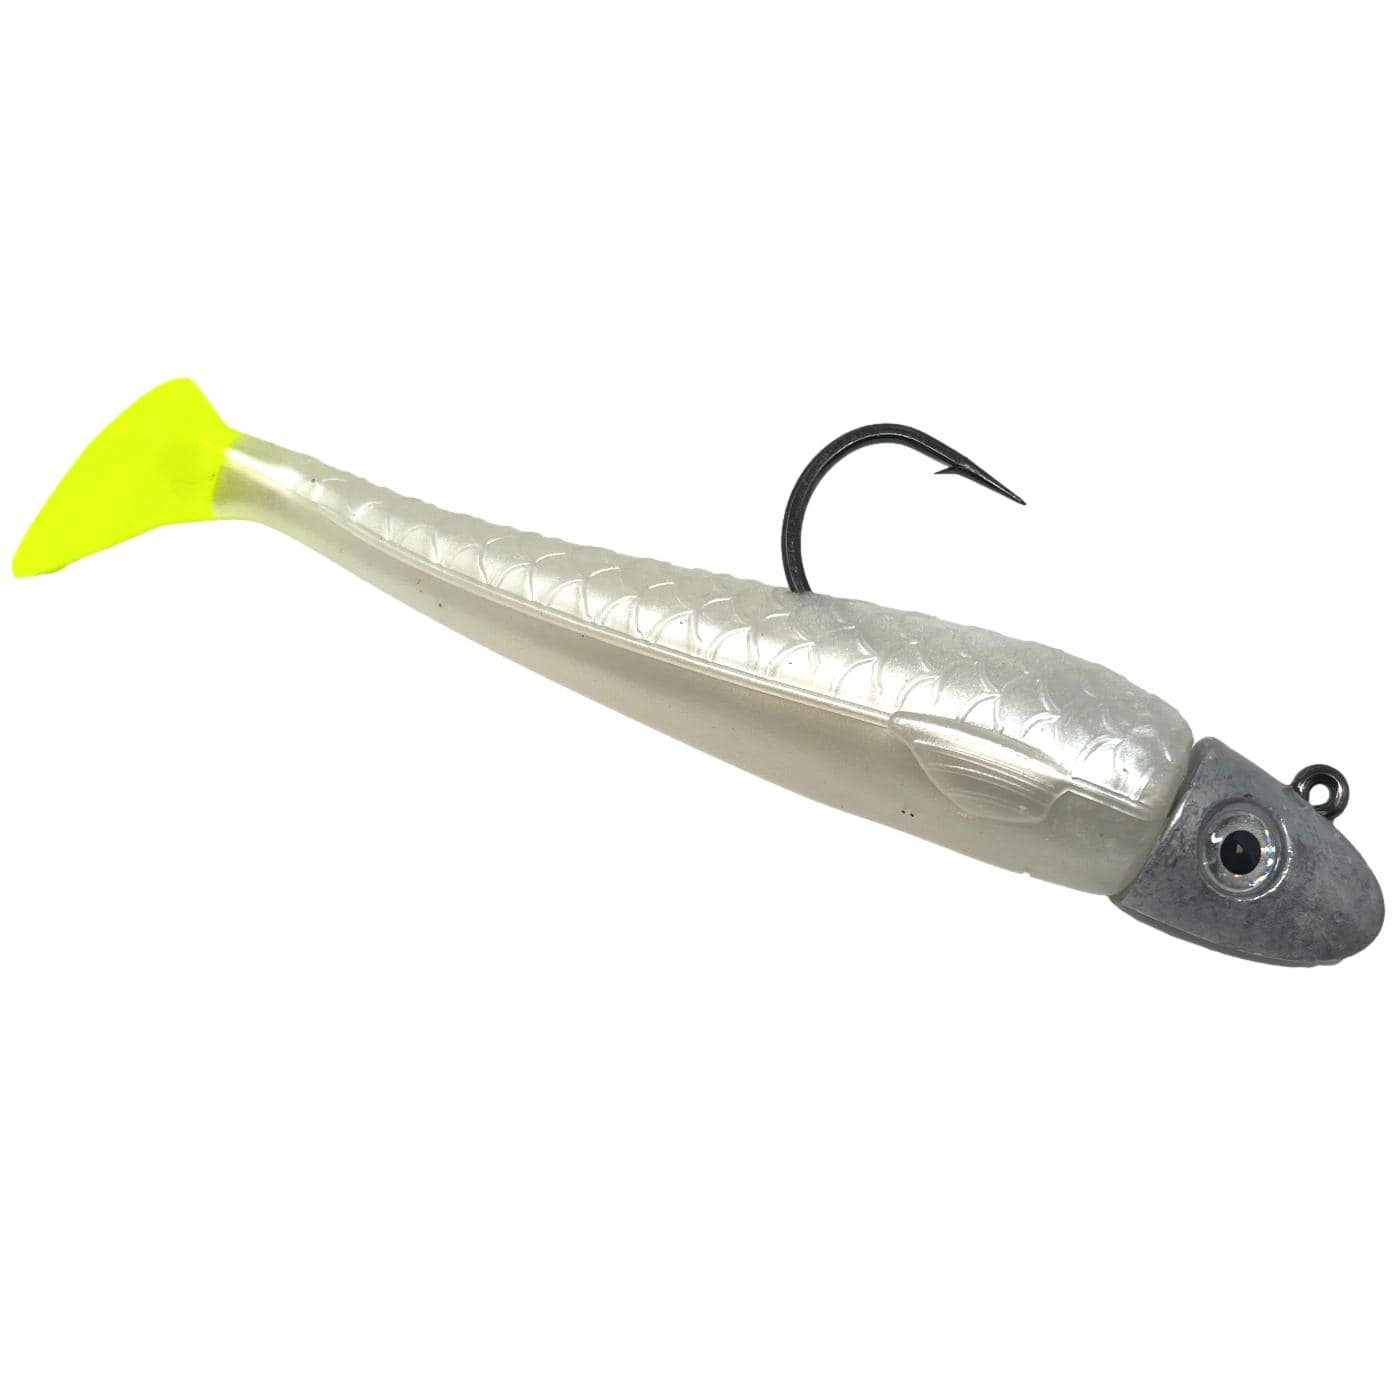 RonZ Original Series Soft Baits – White Water Outfitters